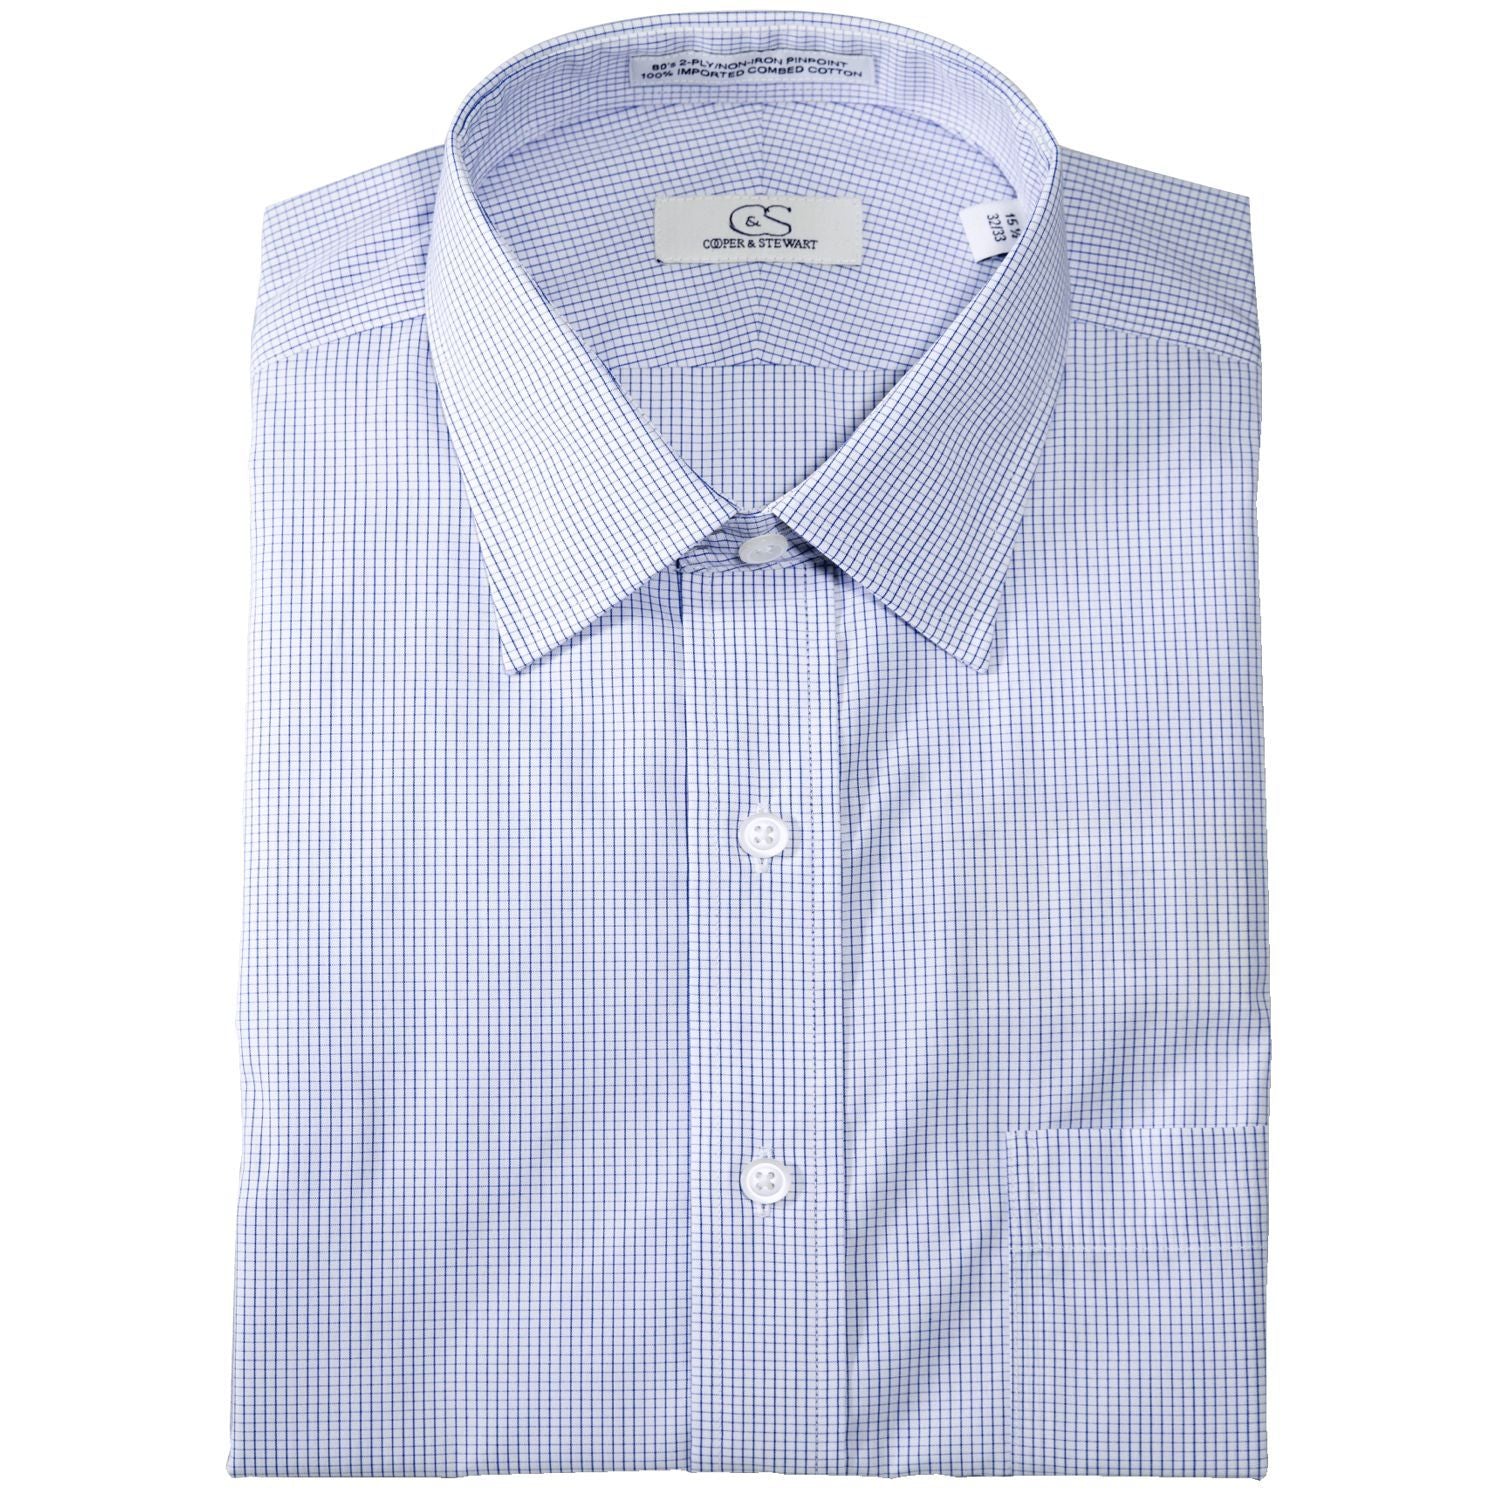 The Dover - Wrinkle-Free Graph Check Cotton Dress Shirt in Blue by Cooper & Stewart